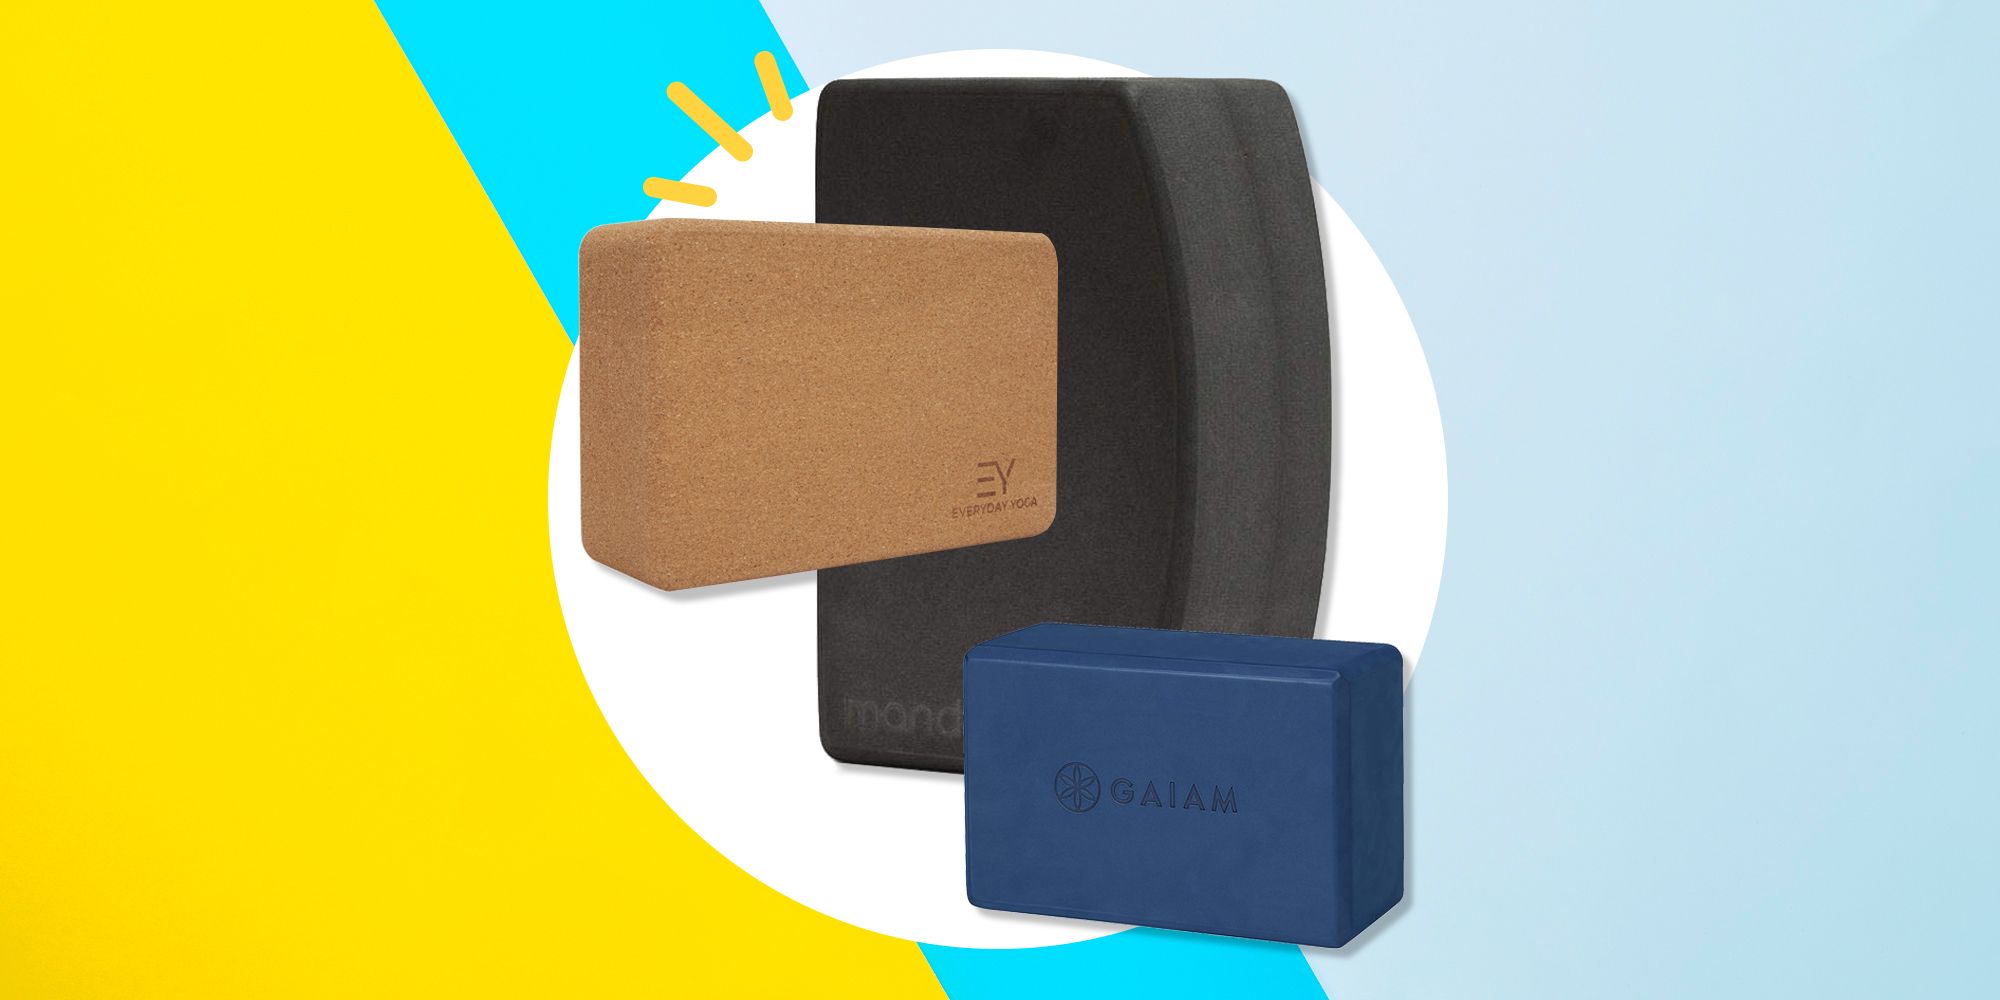 Manduka's Recycled Foam Block is the first among equals